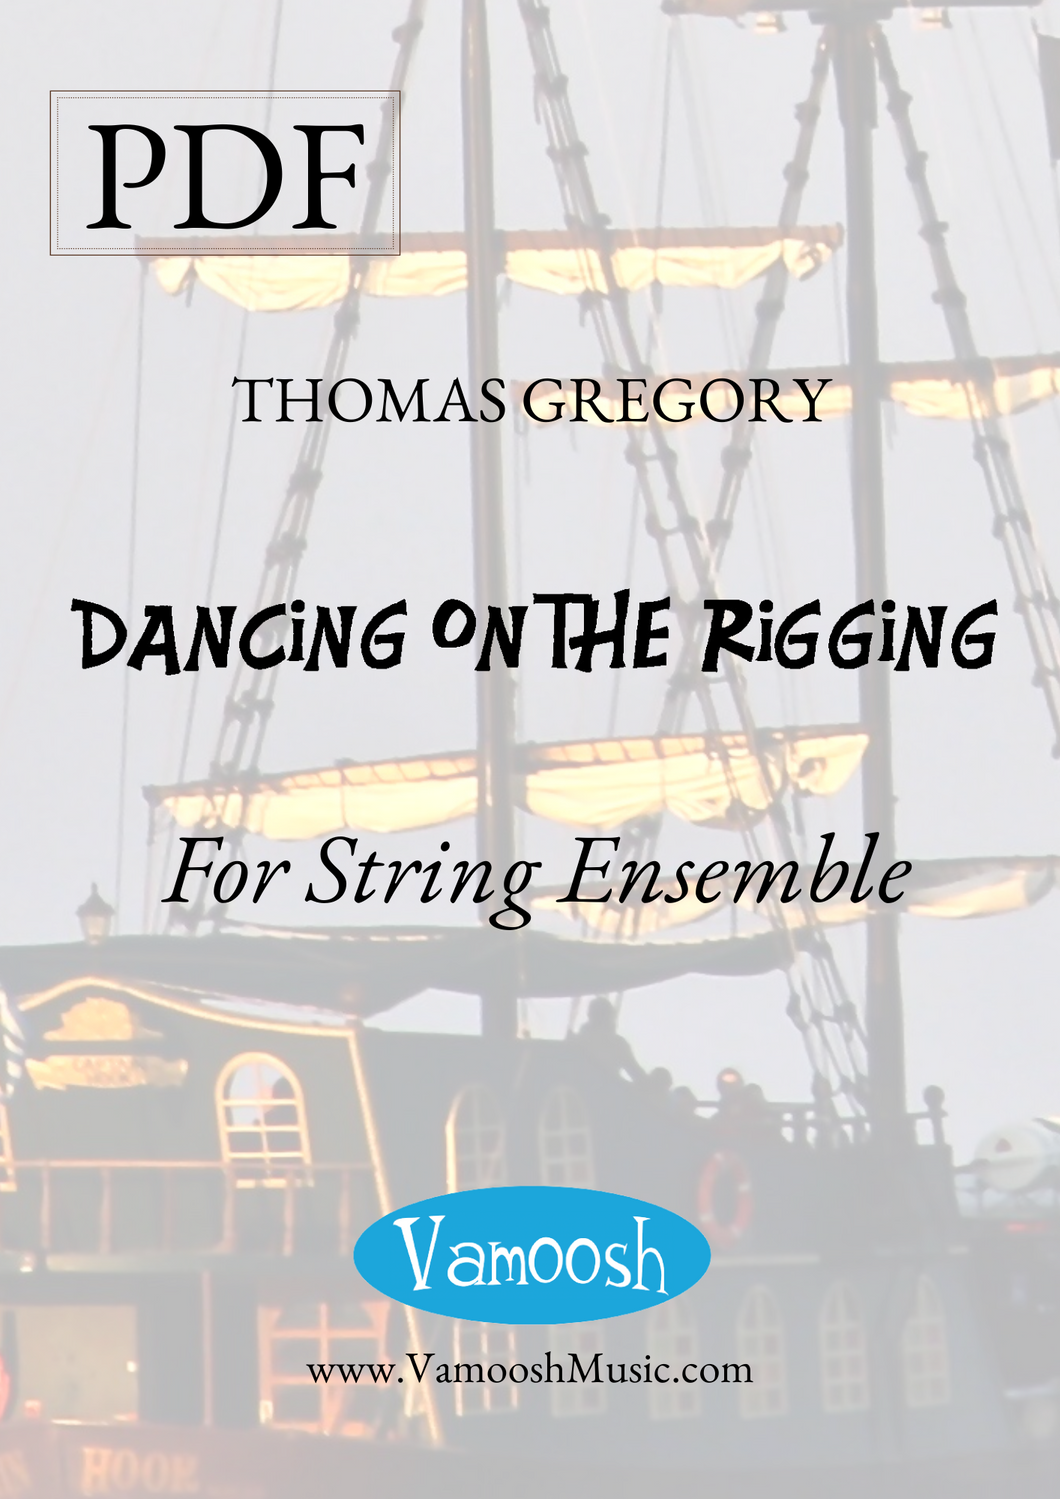 Dancing on the Rigging for String Ensemble by Thomas Gregory